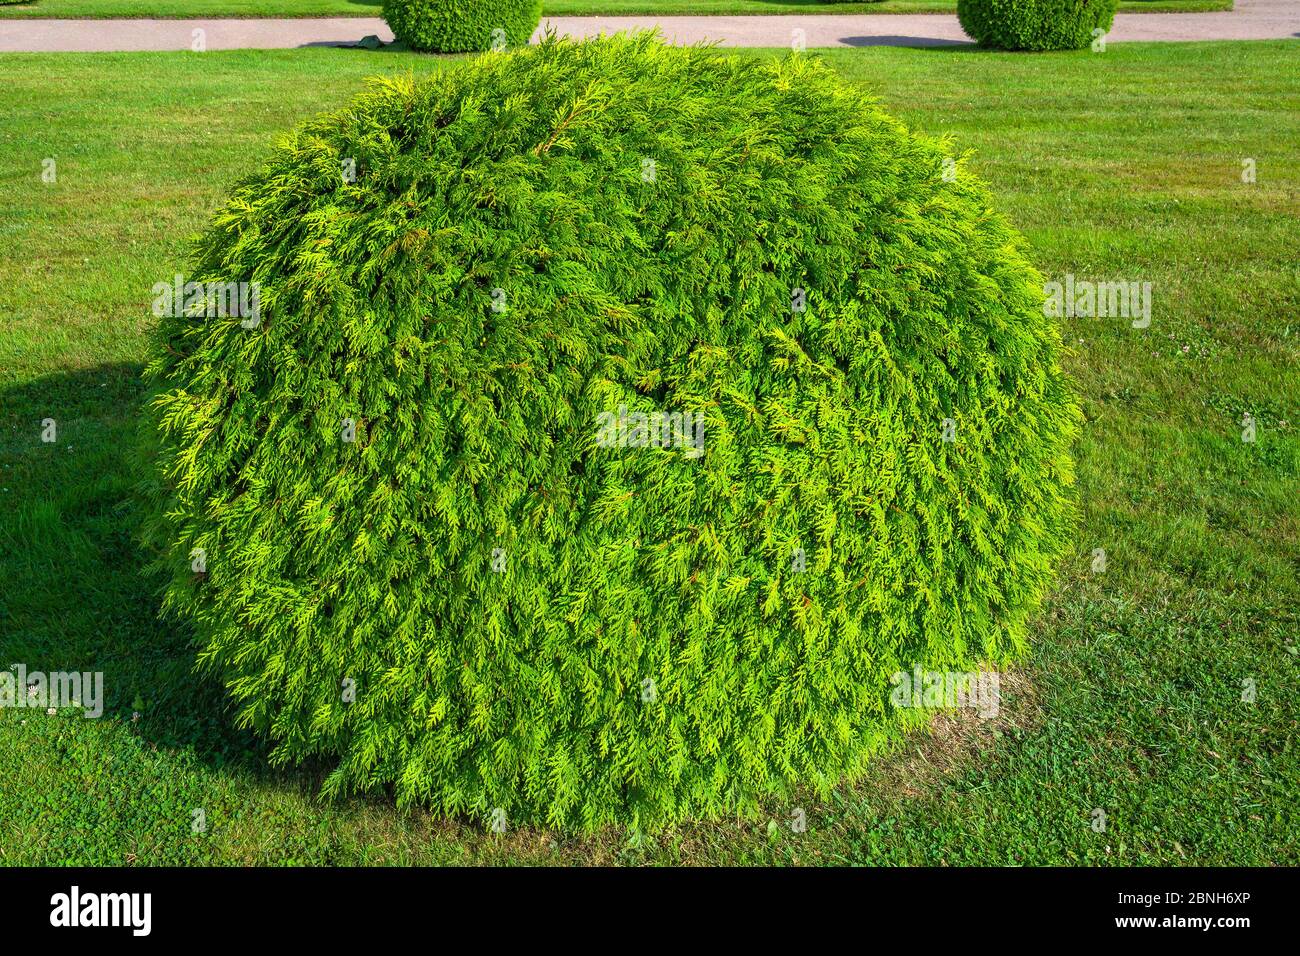 Beautifully trimmed Golden thuja Bush on a manicured lawn Stock Photo